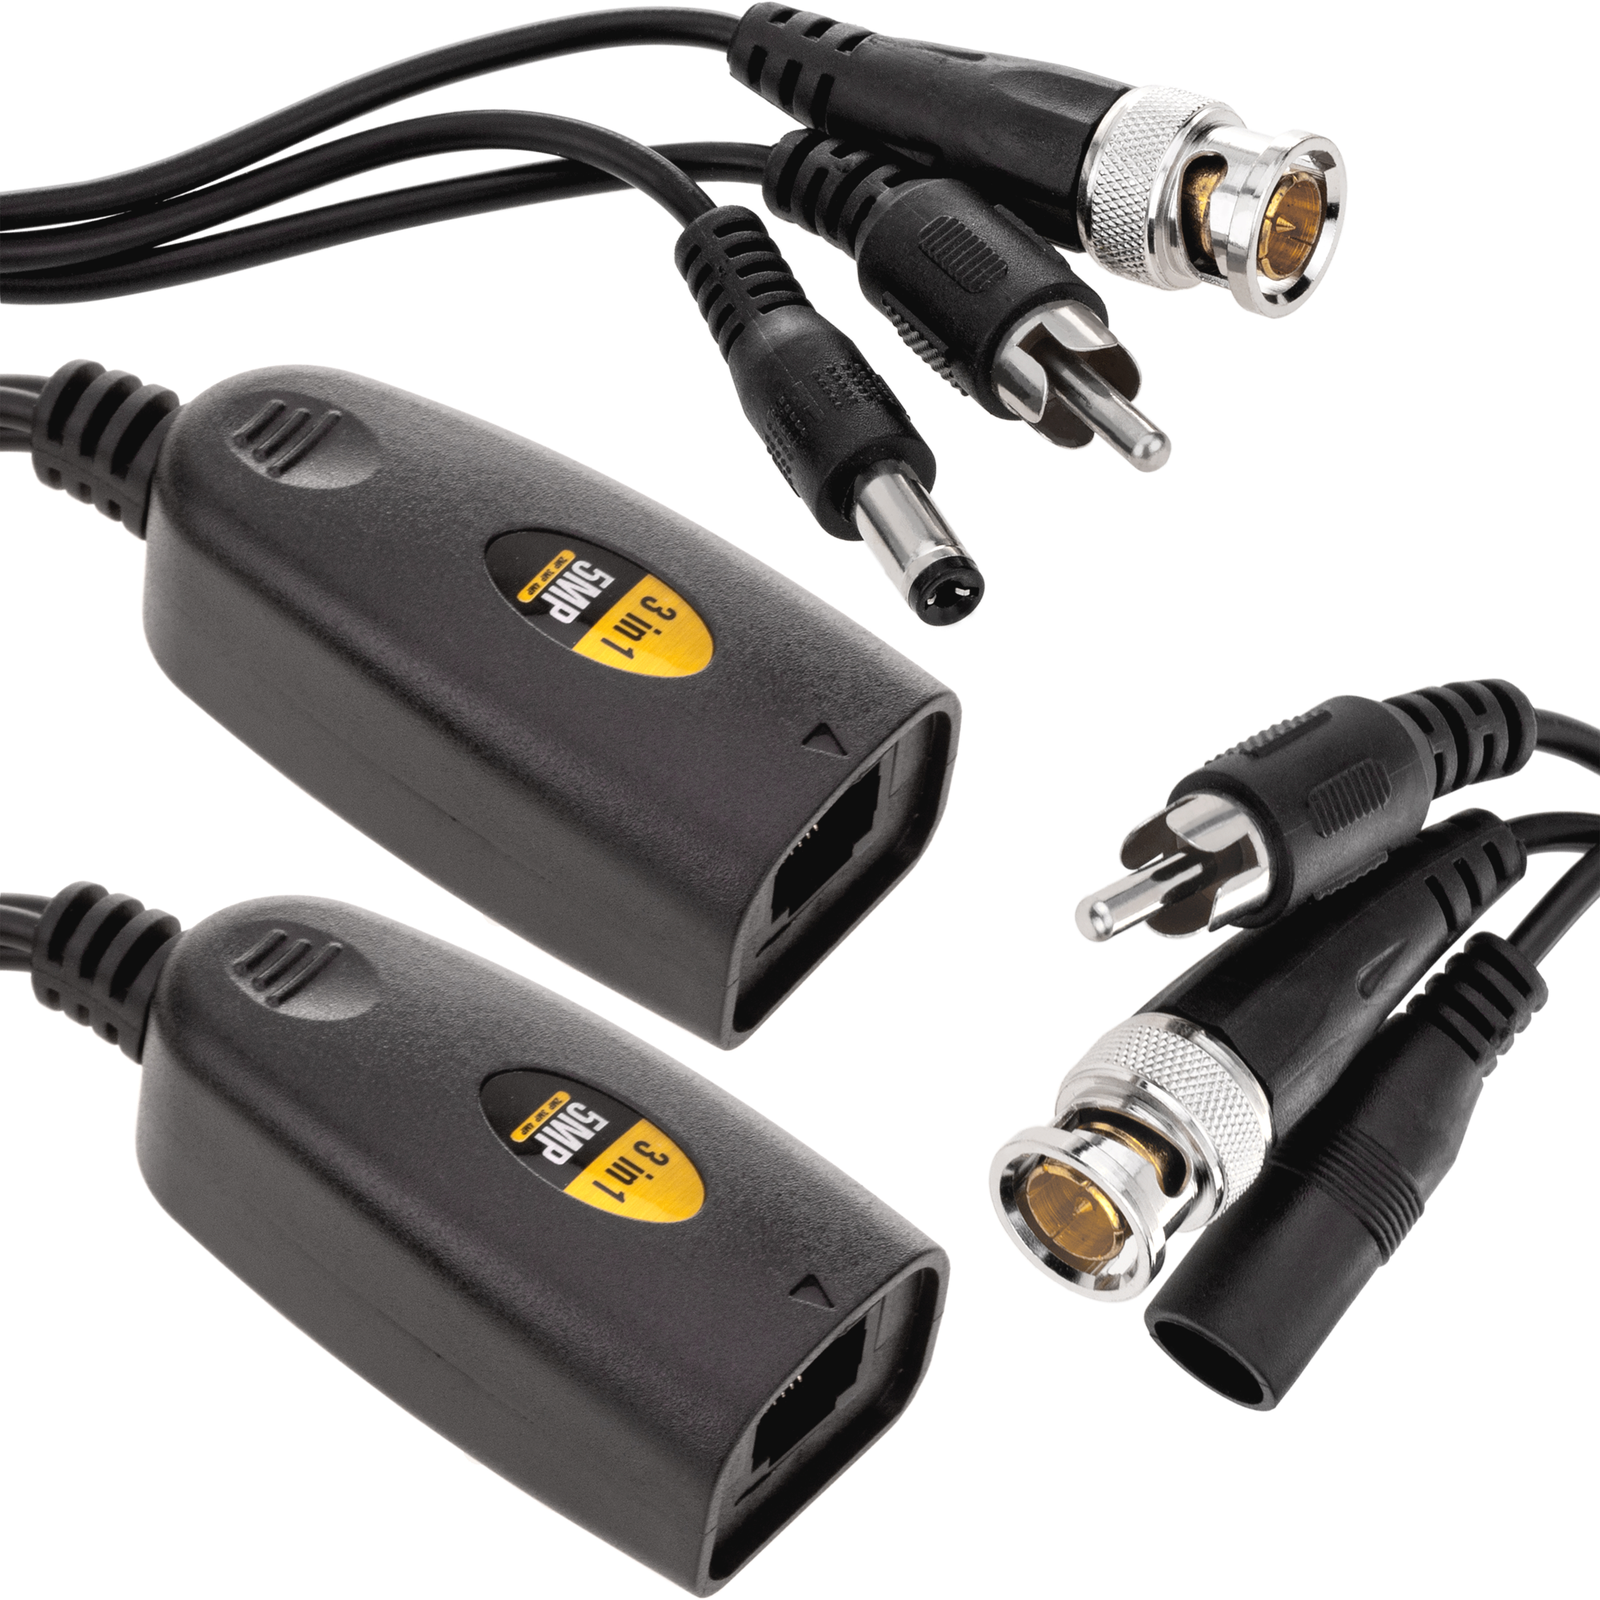 Passive video balun with power and audio (BNC DCJack RCA RJ45) - Cablematic